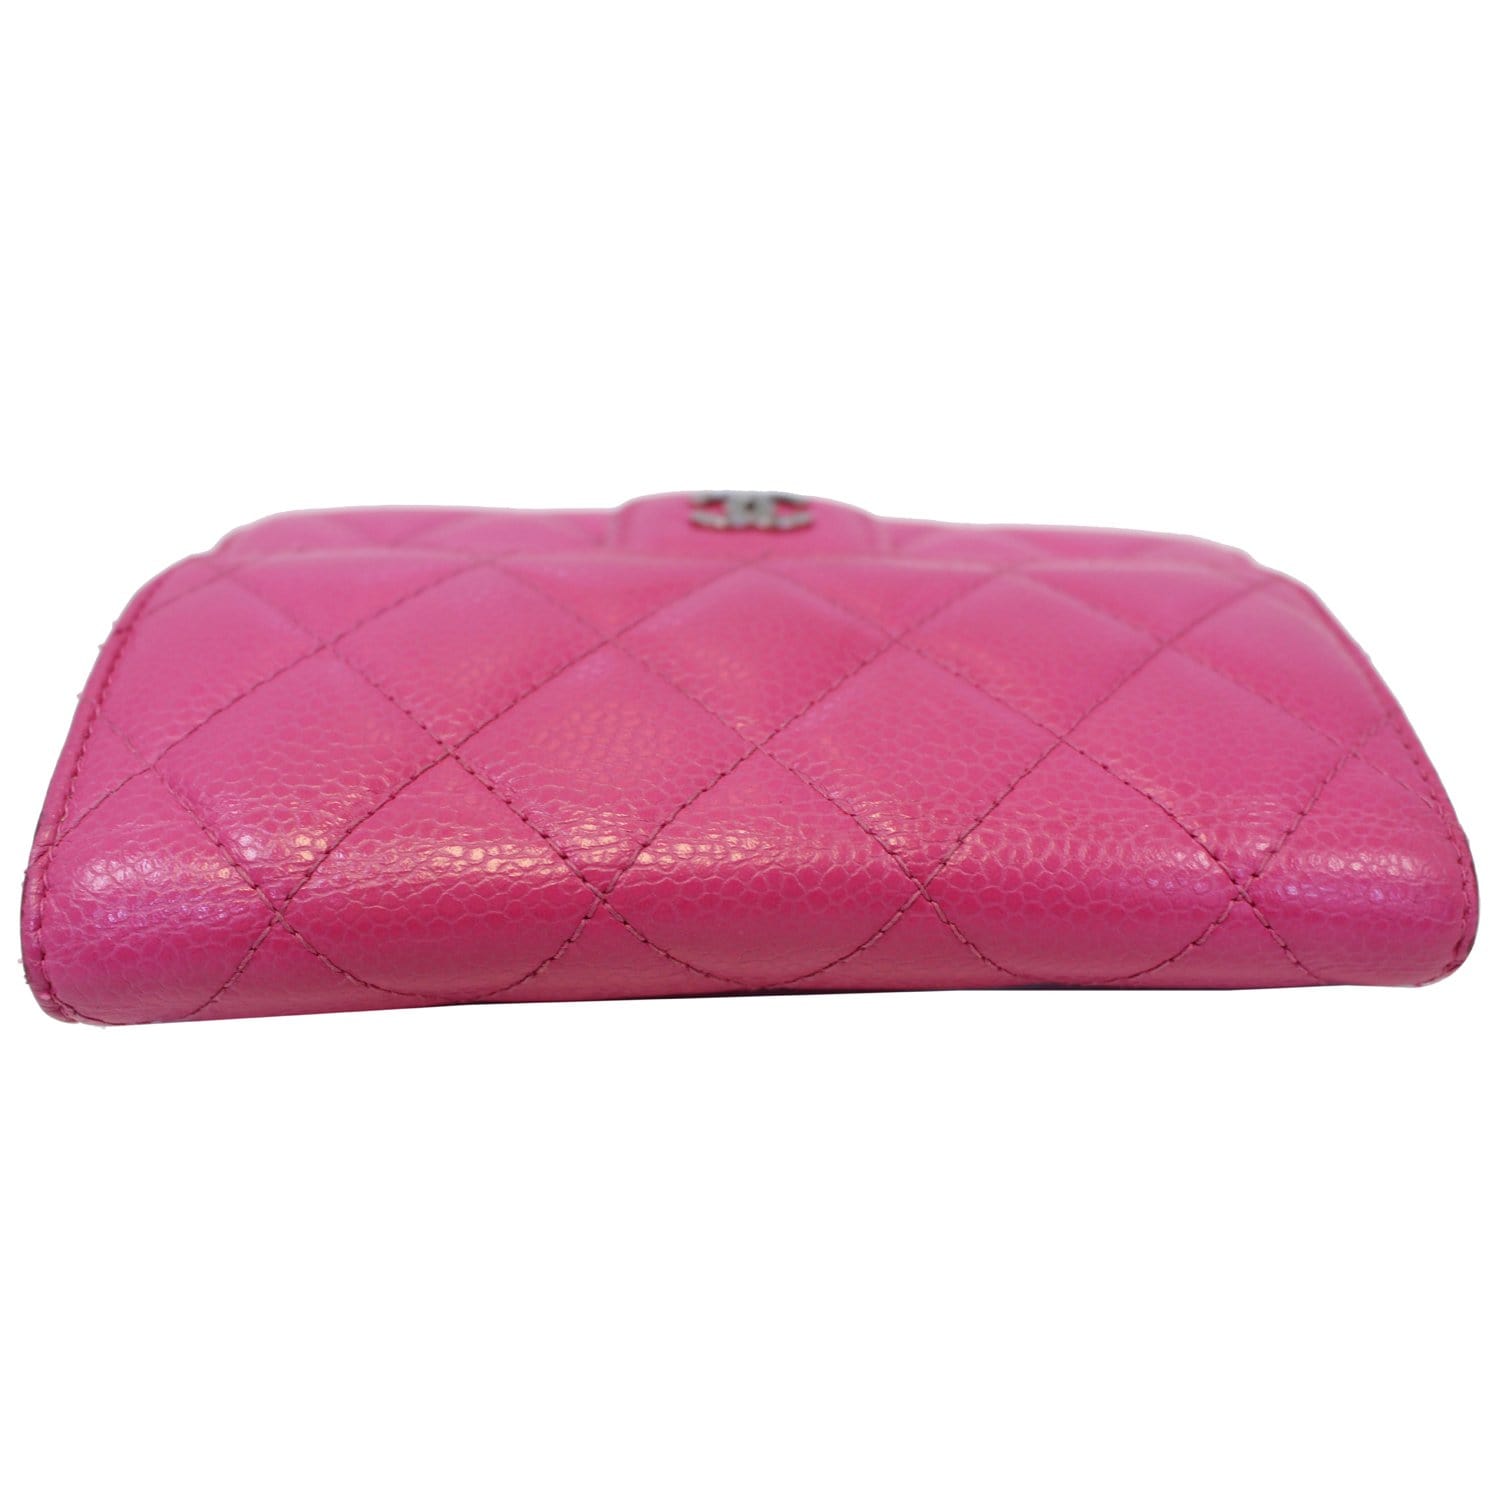 Chanel CC Card Holder Caviar Leather Case Hot Pink